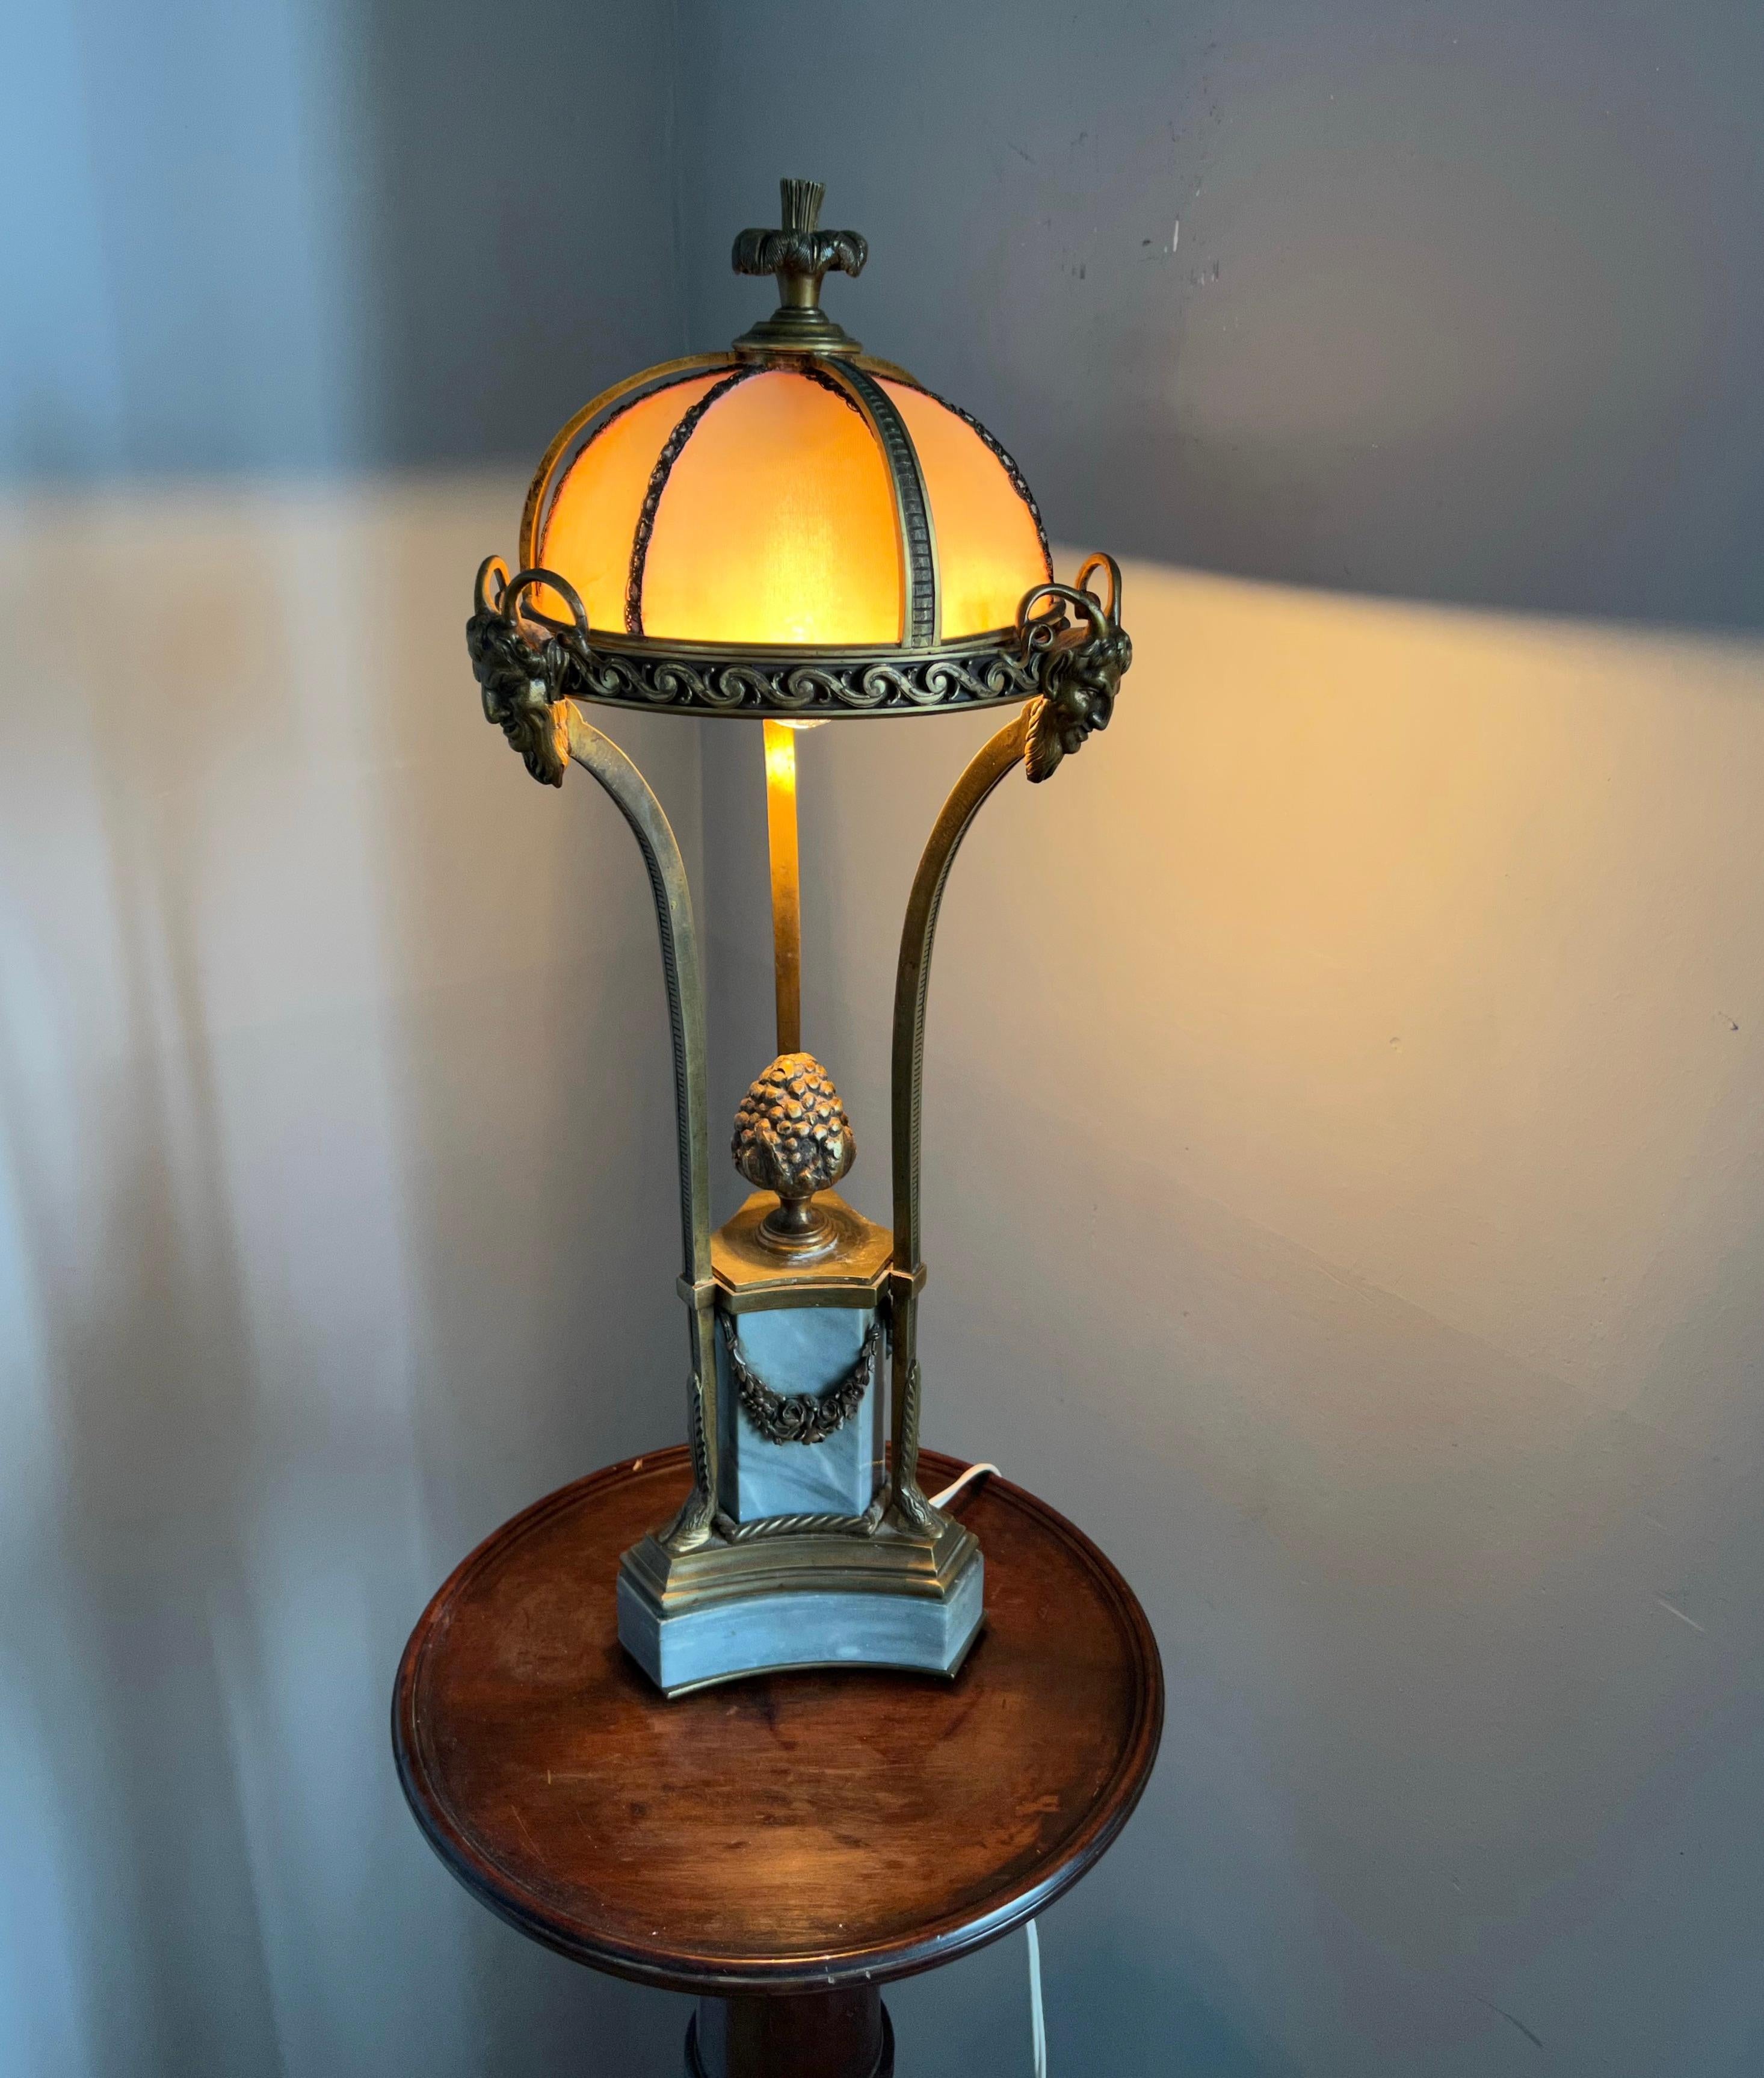 Empire Revival Wonderful Early 1900s Bronze and Marble Table / Desk Lamp with Faun Sculptures For Sale